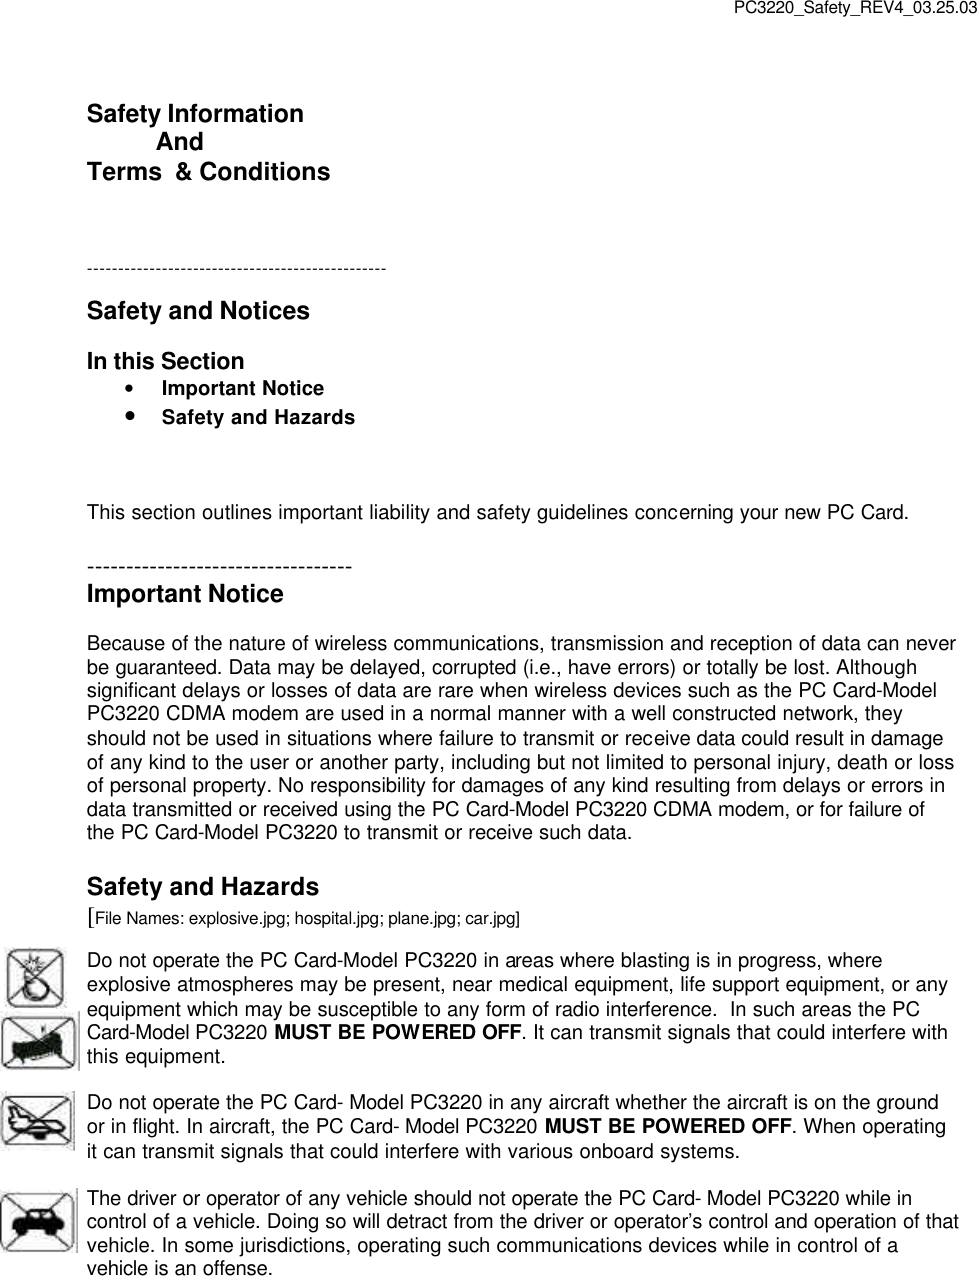 PC3220_Safety_REV4_03.25.03  Safety Information            And Terms  &amp; Conditions    ------------------------------------------------  Safety and Notices  In this Section • Important Notice • Safety and Hazards    This section outlines important liability and safety guidelines concerning your new PC Card.  ---------------------------------- Important Notice  Because of the nature of wireless communications, transmission and reception of data can never be guaranteed. Data may be delayed, corrupted (i.e., have errors) or totally be lost. Although significant delays or losses of data are rare when wireless devices such as the PC Card-Model PC3220 CDMA modem are used in a normal manner with a well constructed network, they should not be used in situations where failure to transmit or receive data could result in damage of any kind to the user or another party, including but not limited to personal injury, death or loss of personal property. No responsibility for damages of any kind resulting from delays or errors in data transmitted or received using the PC Card-Model PC3220 CDMA modem, or for failure of the PC Card-Model PC3220 to transmit or receive such data.  Safety and Hazards [File Names: explosive.jpg; hospital.jpg; plane.jpg; car.jpg]  Do not operate the PC Card-Model PC3220 in areas where blasting is in progress, where explosive atmospheres may be present, near medical equipment, life support equipment, or any equipment which may be susceptible to any form of radio interference.  In such areas the PC Card-Model PC3220 MUST BE POWERED OFF. It can transmit signals that could interfere with this equipment.  Do not operate the PC Card- Model PC3220 in any aircraft whether the aircraft is on the ground or in flight. In aircraft, the PC Card- Model PC3220 MUST BE POWERED OFF. When operating it can transmit signals that could interfere with various onboard systems.  The driver or operator of any vehicle should not operate the PC Card- Model PC3220 while in control of a vehicle. Doing so will detract from the driver or operator’s control and operation of that vehicle. In some jurisdictions, operating such communications devices while in control of a vehicle is an offense.     